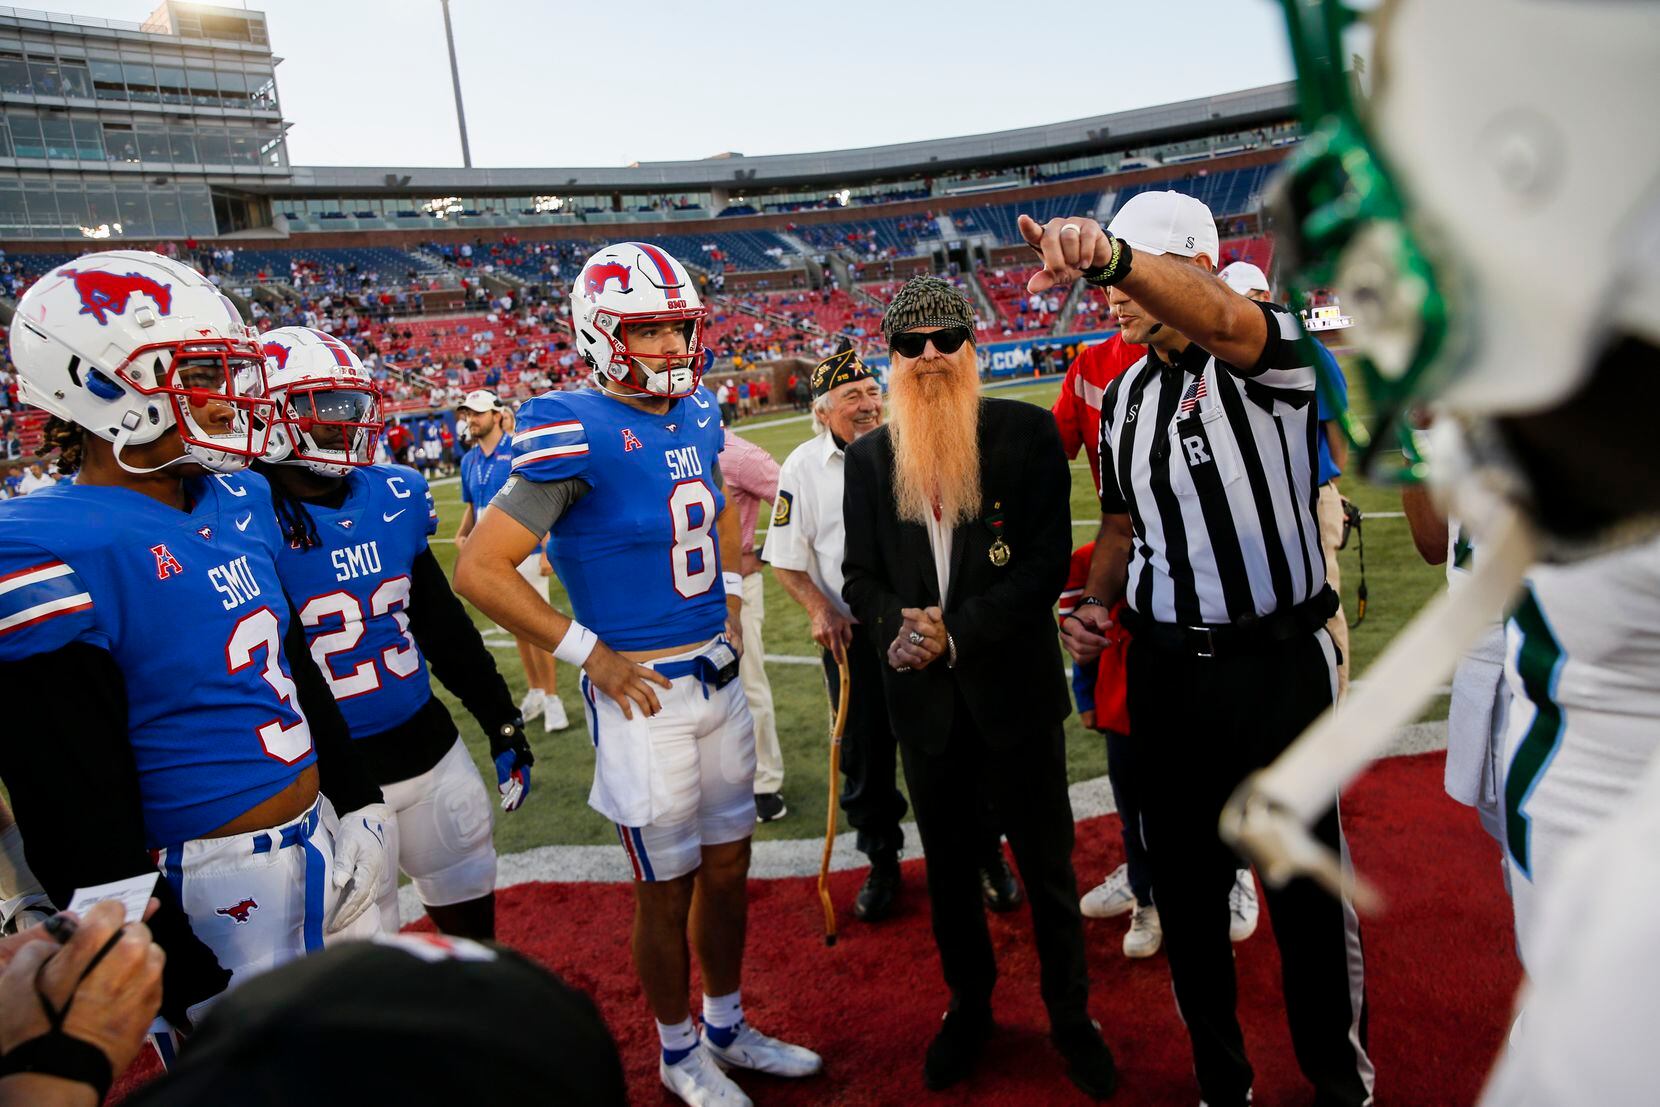 ZZ Top's Billy Gibbons (with beard) does the coin toss before the start of a game between...